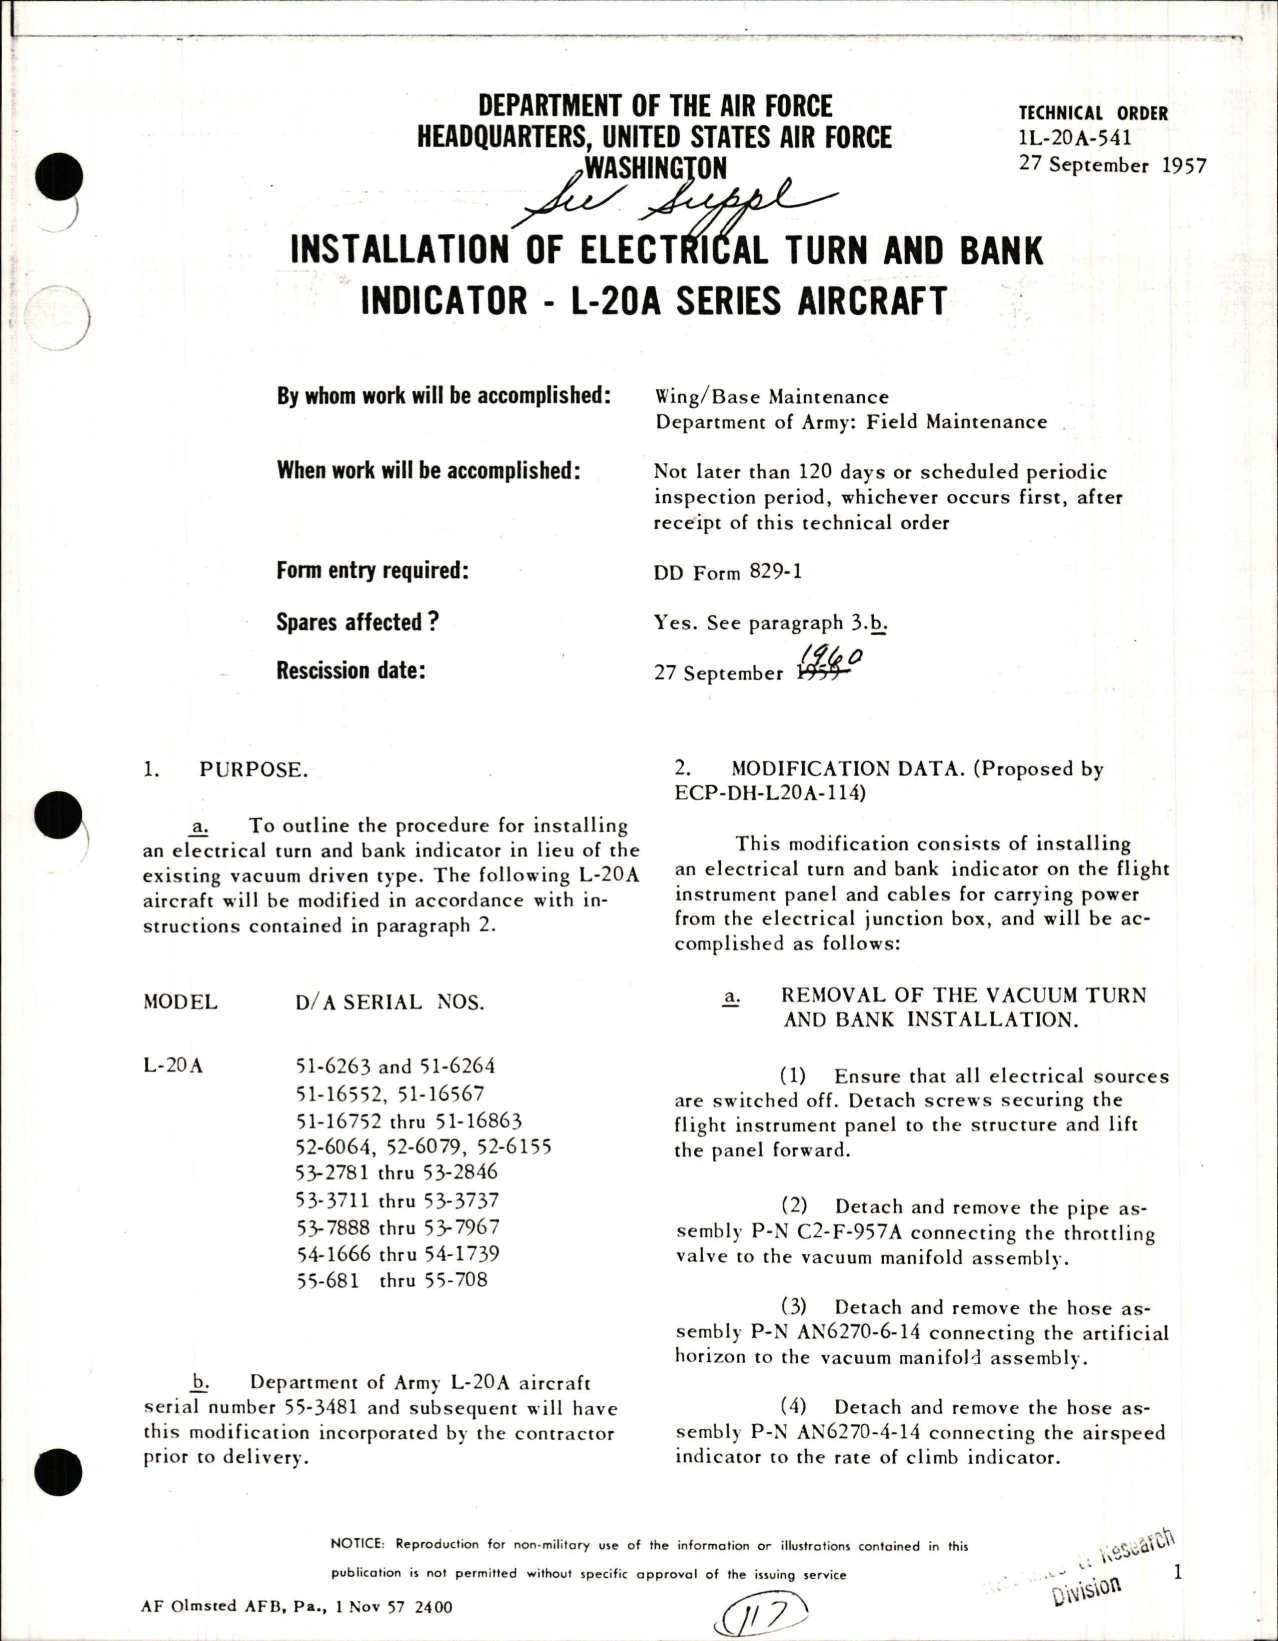 Sample page 1 from AirCorps Library document: Installation of Electrical Turn and Bank Indicator - L-20A Series